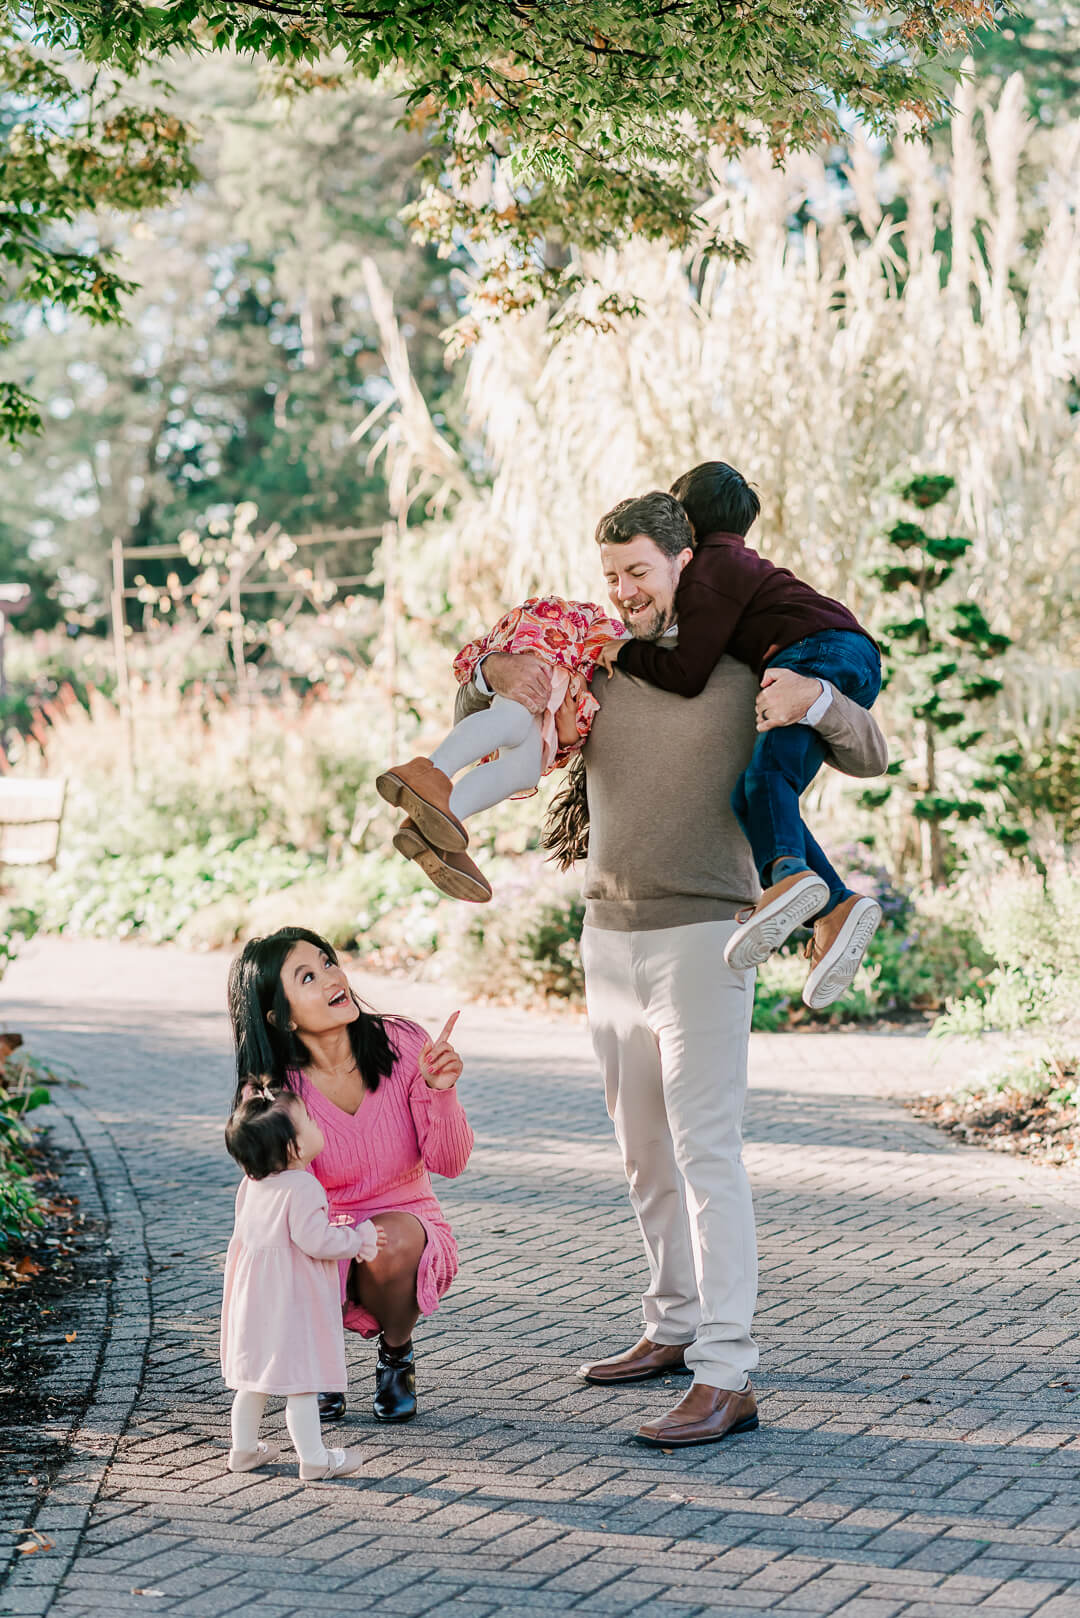 A father lifts his two toddler children over his shoulders while walking in a garden trail with mom and youngest watching during things to do in tysons corner